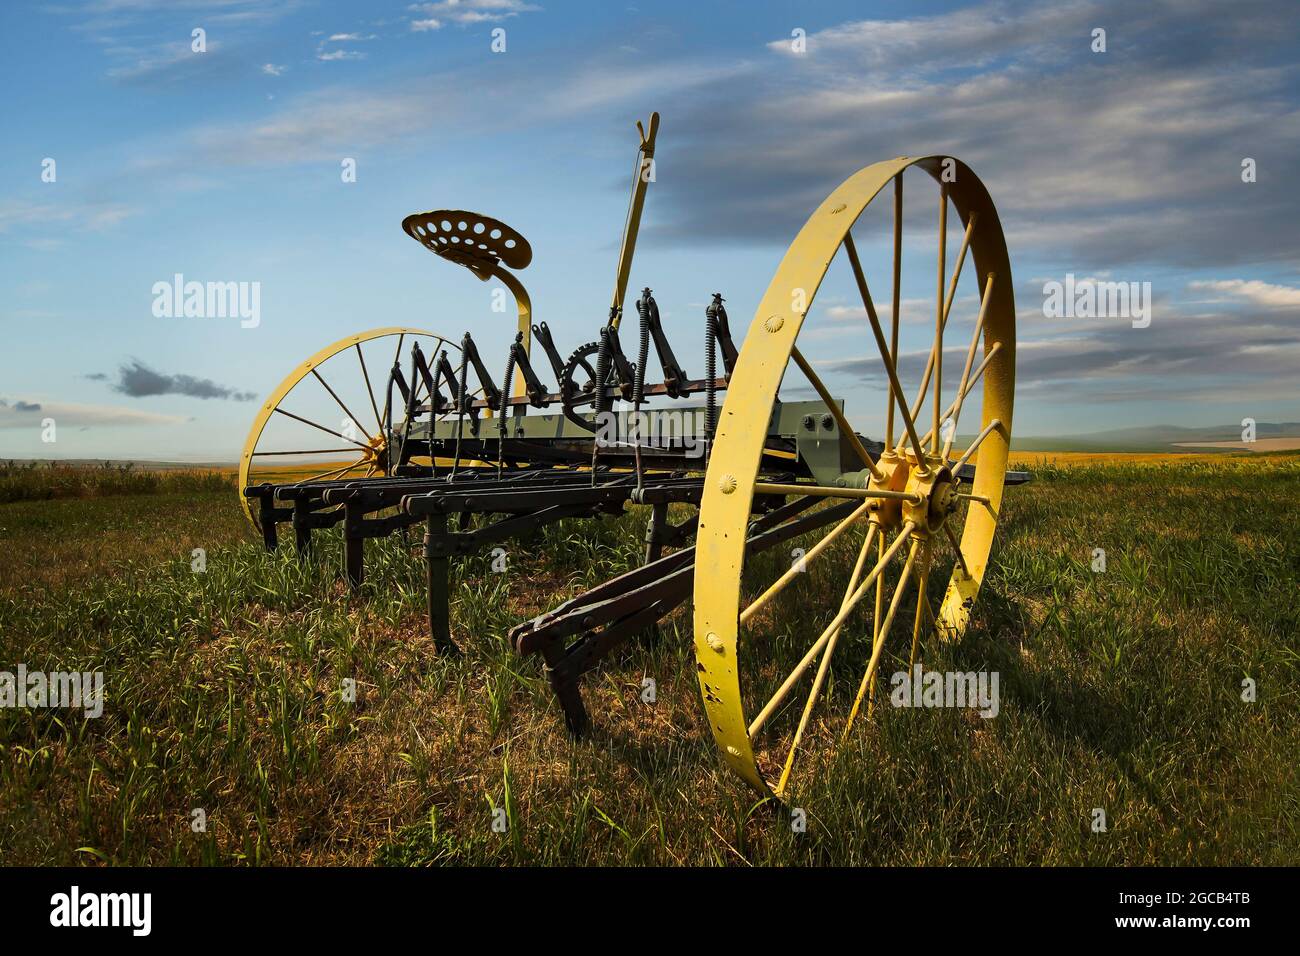 A vintage piece of agriculture equipment on a Canadian prairies farm in Alberta Canada. Stock Photo